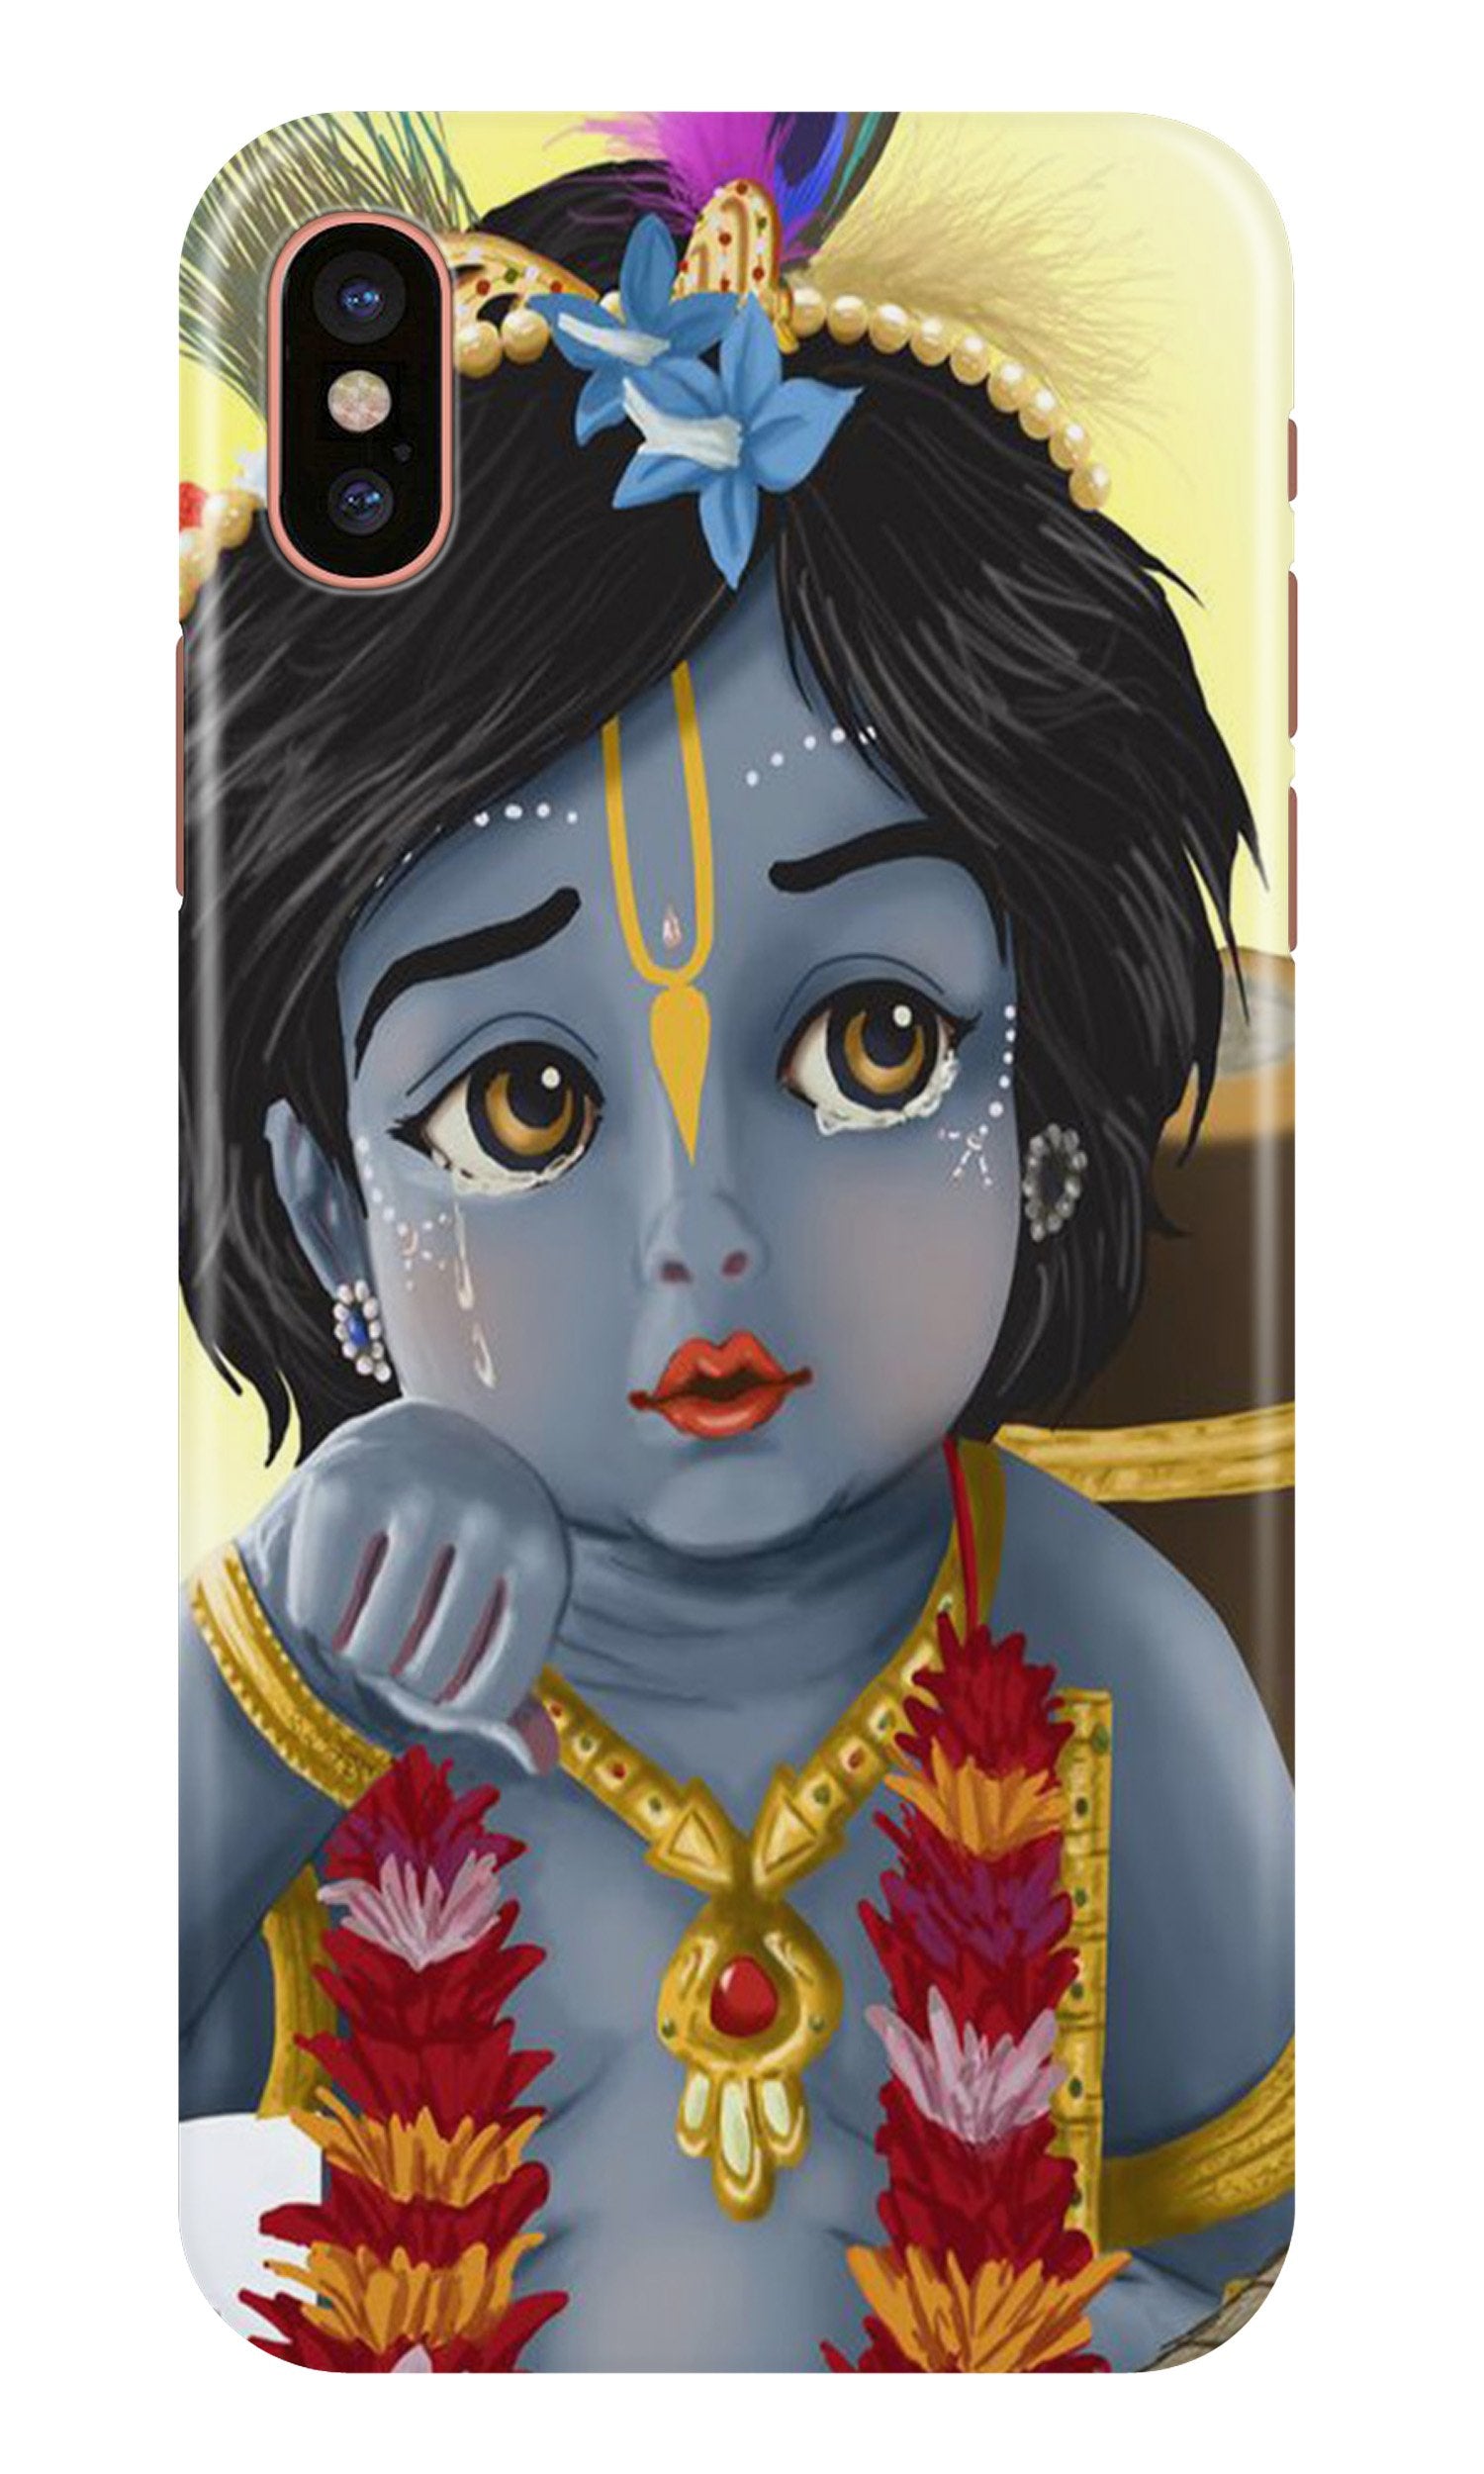 Bal Gopal Case for iPhone X